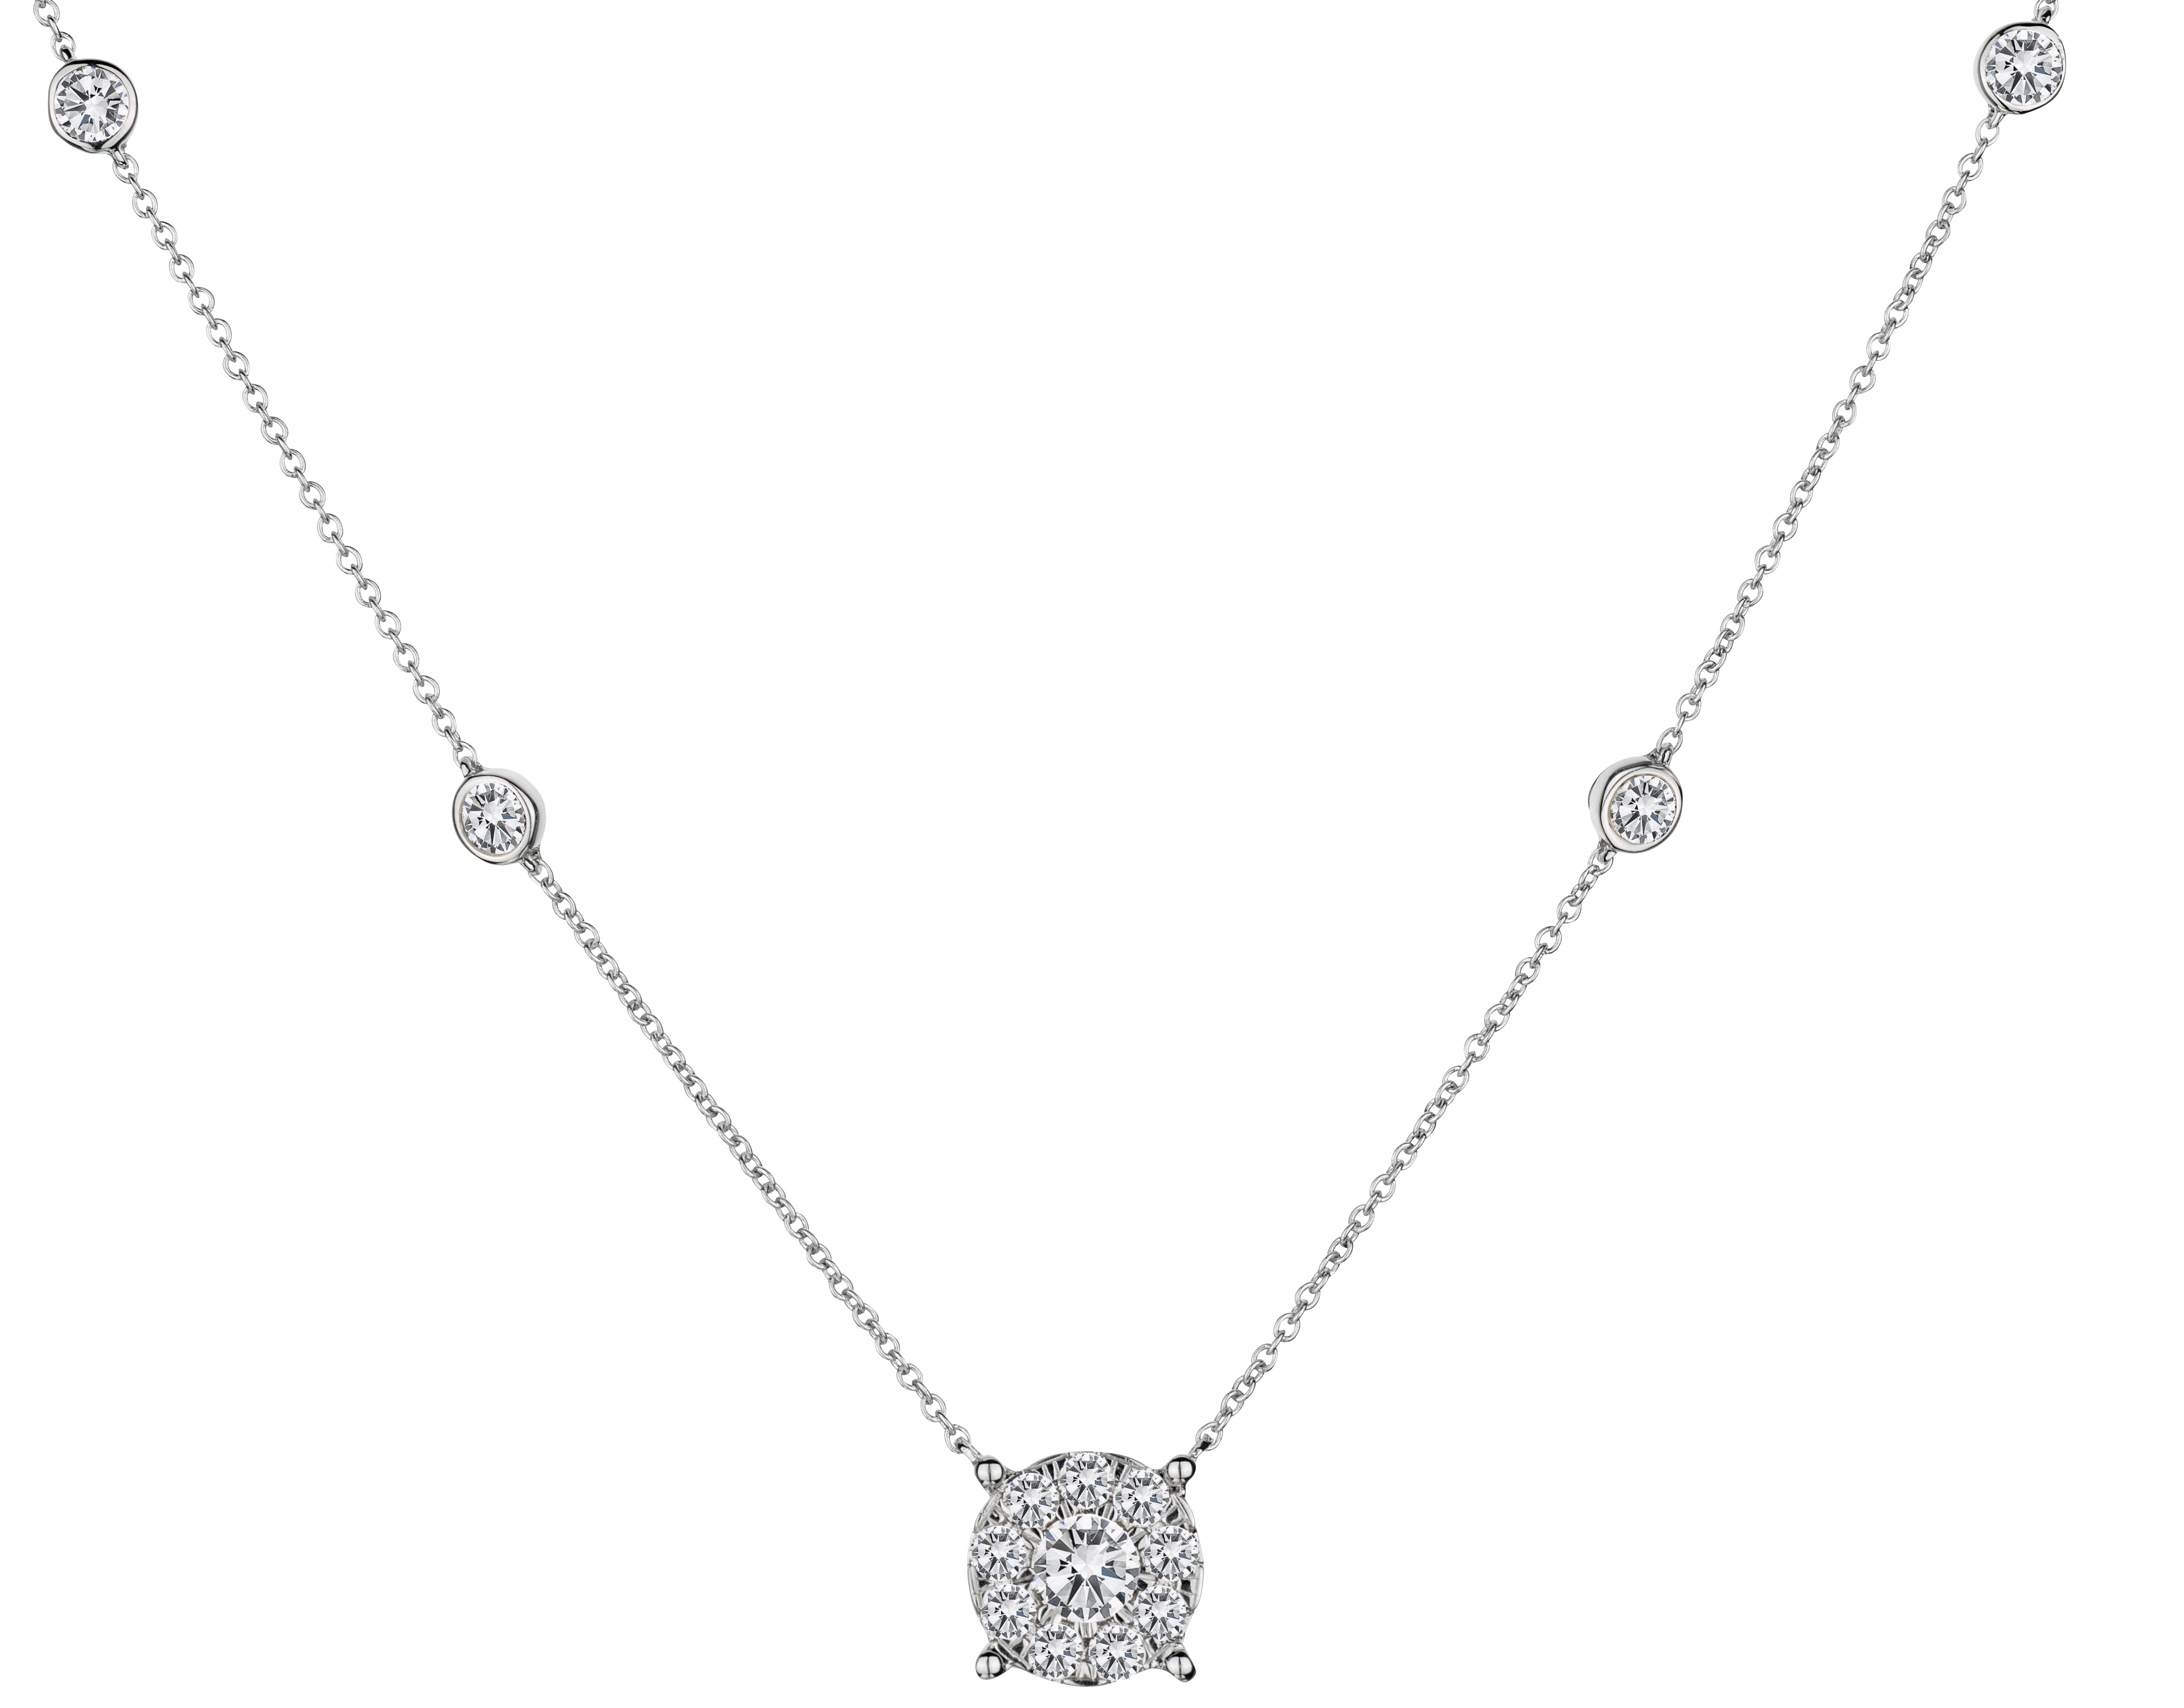 1.00 Carat of Diamonds Necklace, 14kt White Gold.....................NOW